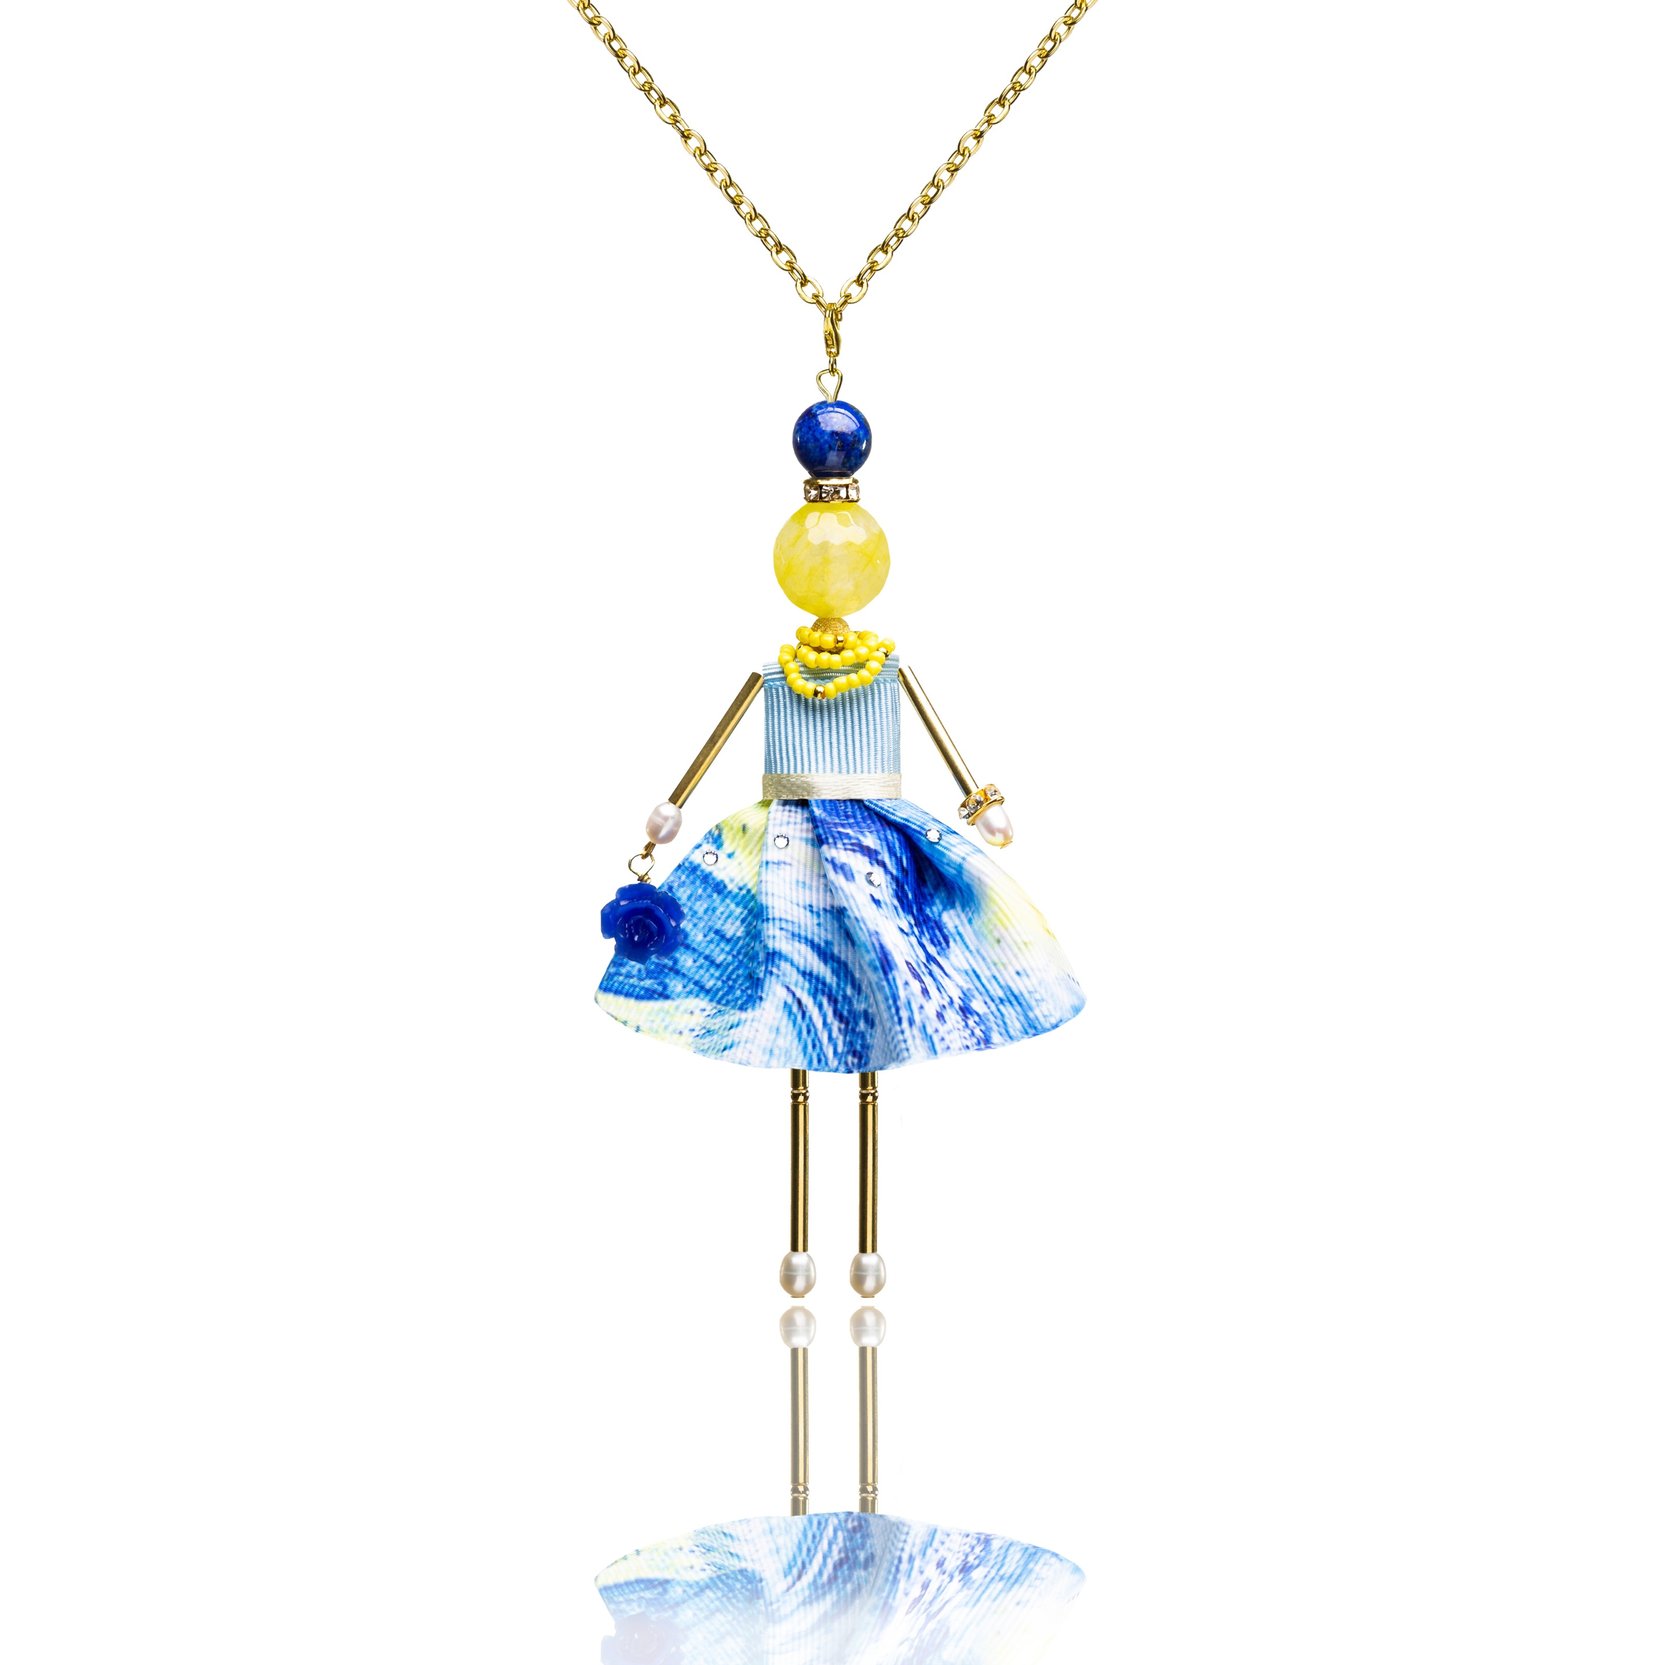 Doll-pendant with yellow agate based on the painting "Starry Sky" by Van Gogh